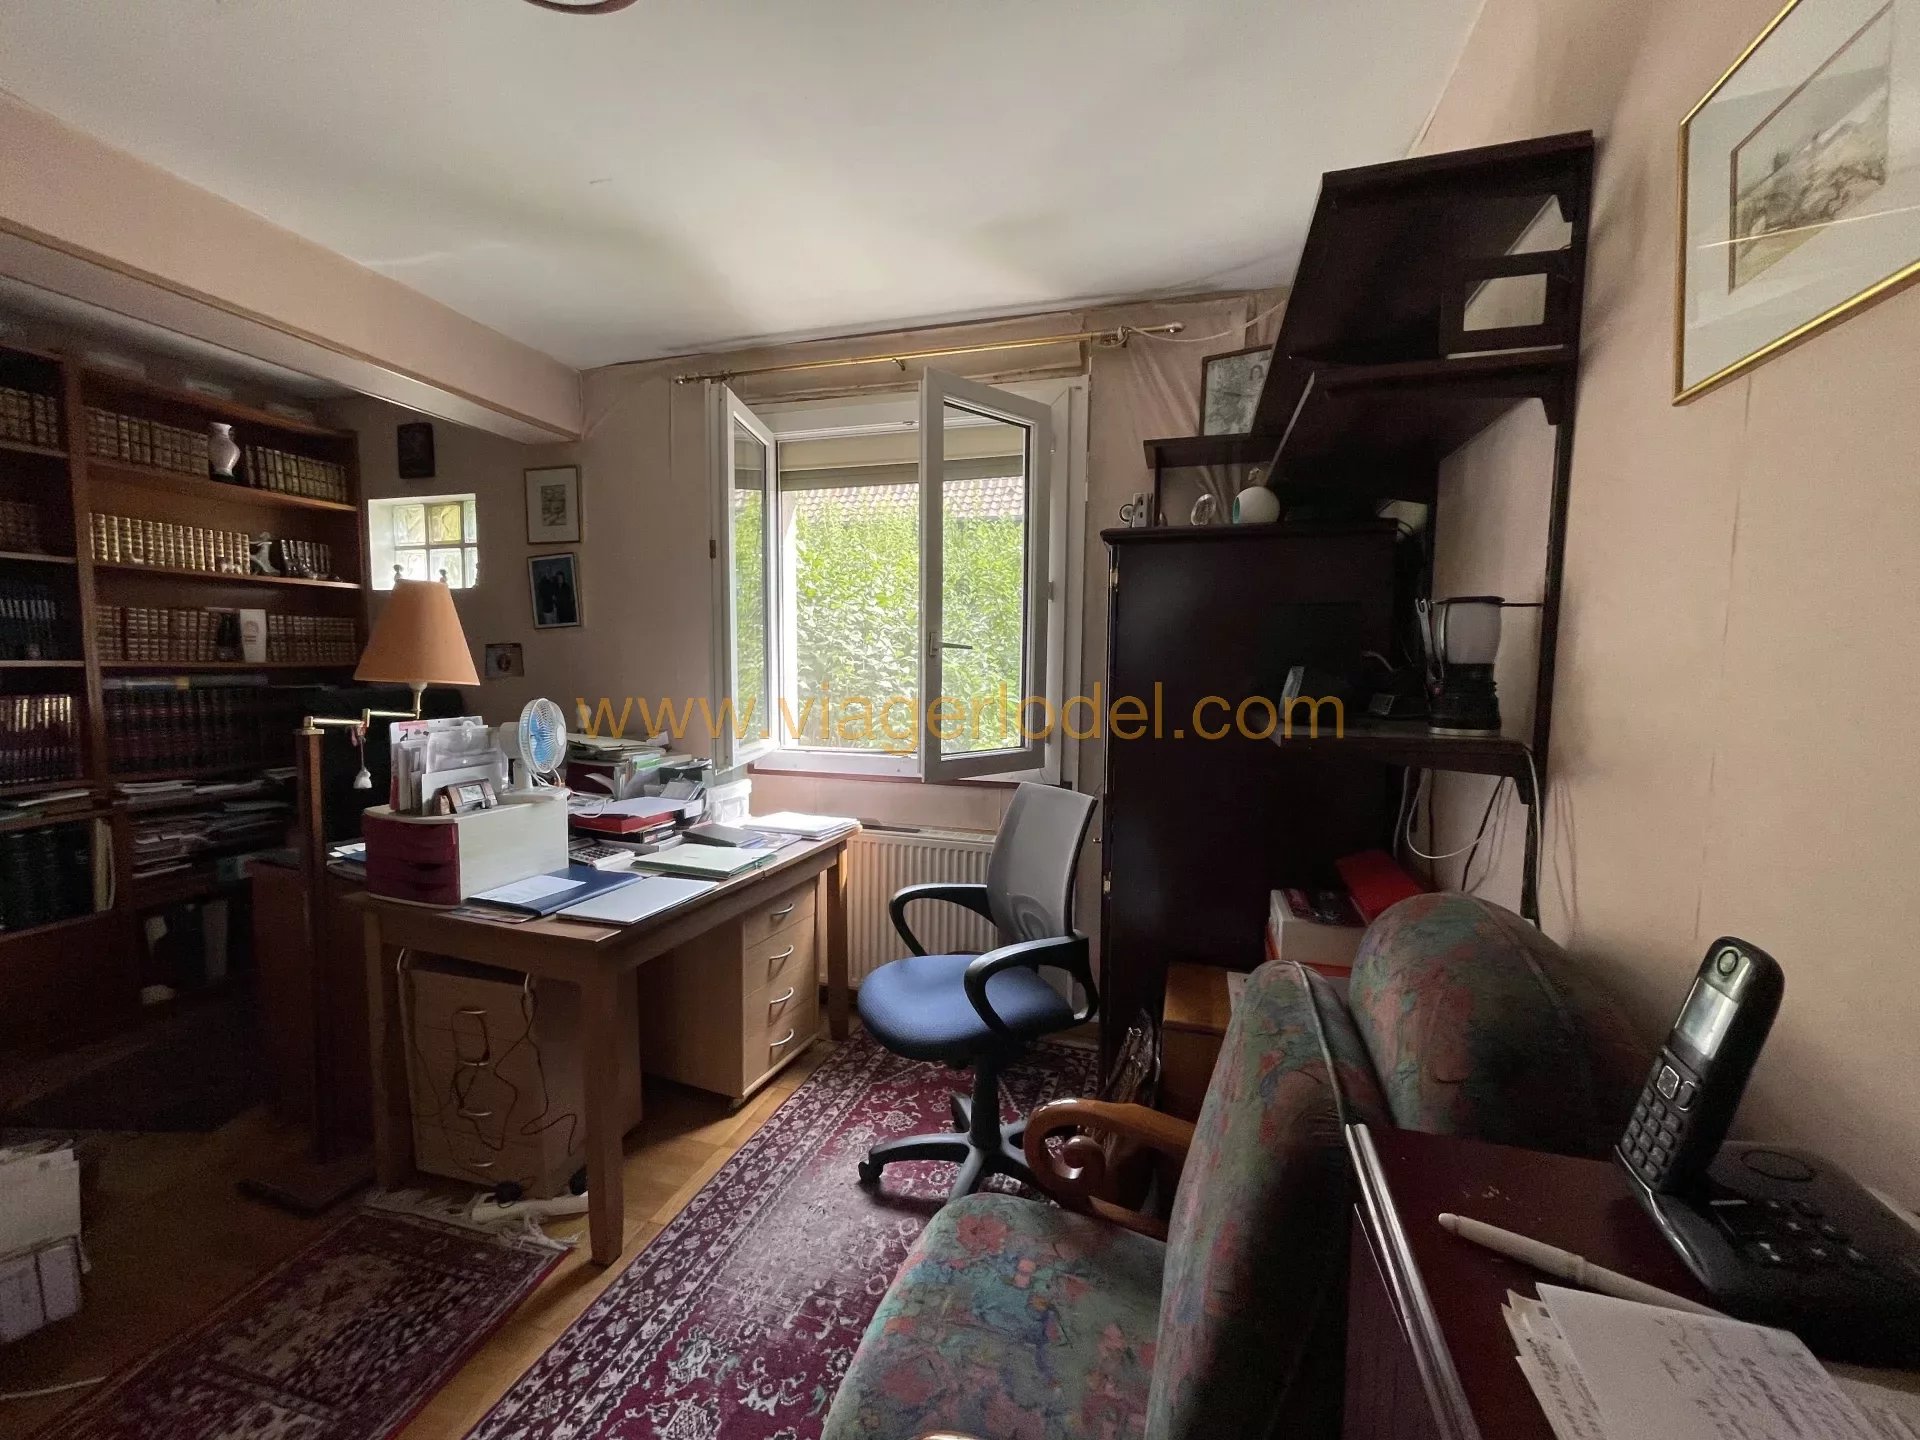 Ref. 9181 - BARE OWNERSHIP - VERRIERE-LE-BUISSON (91) -